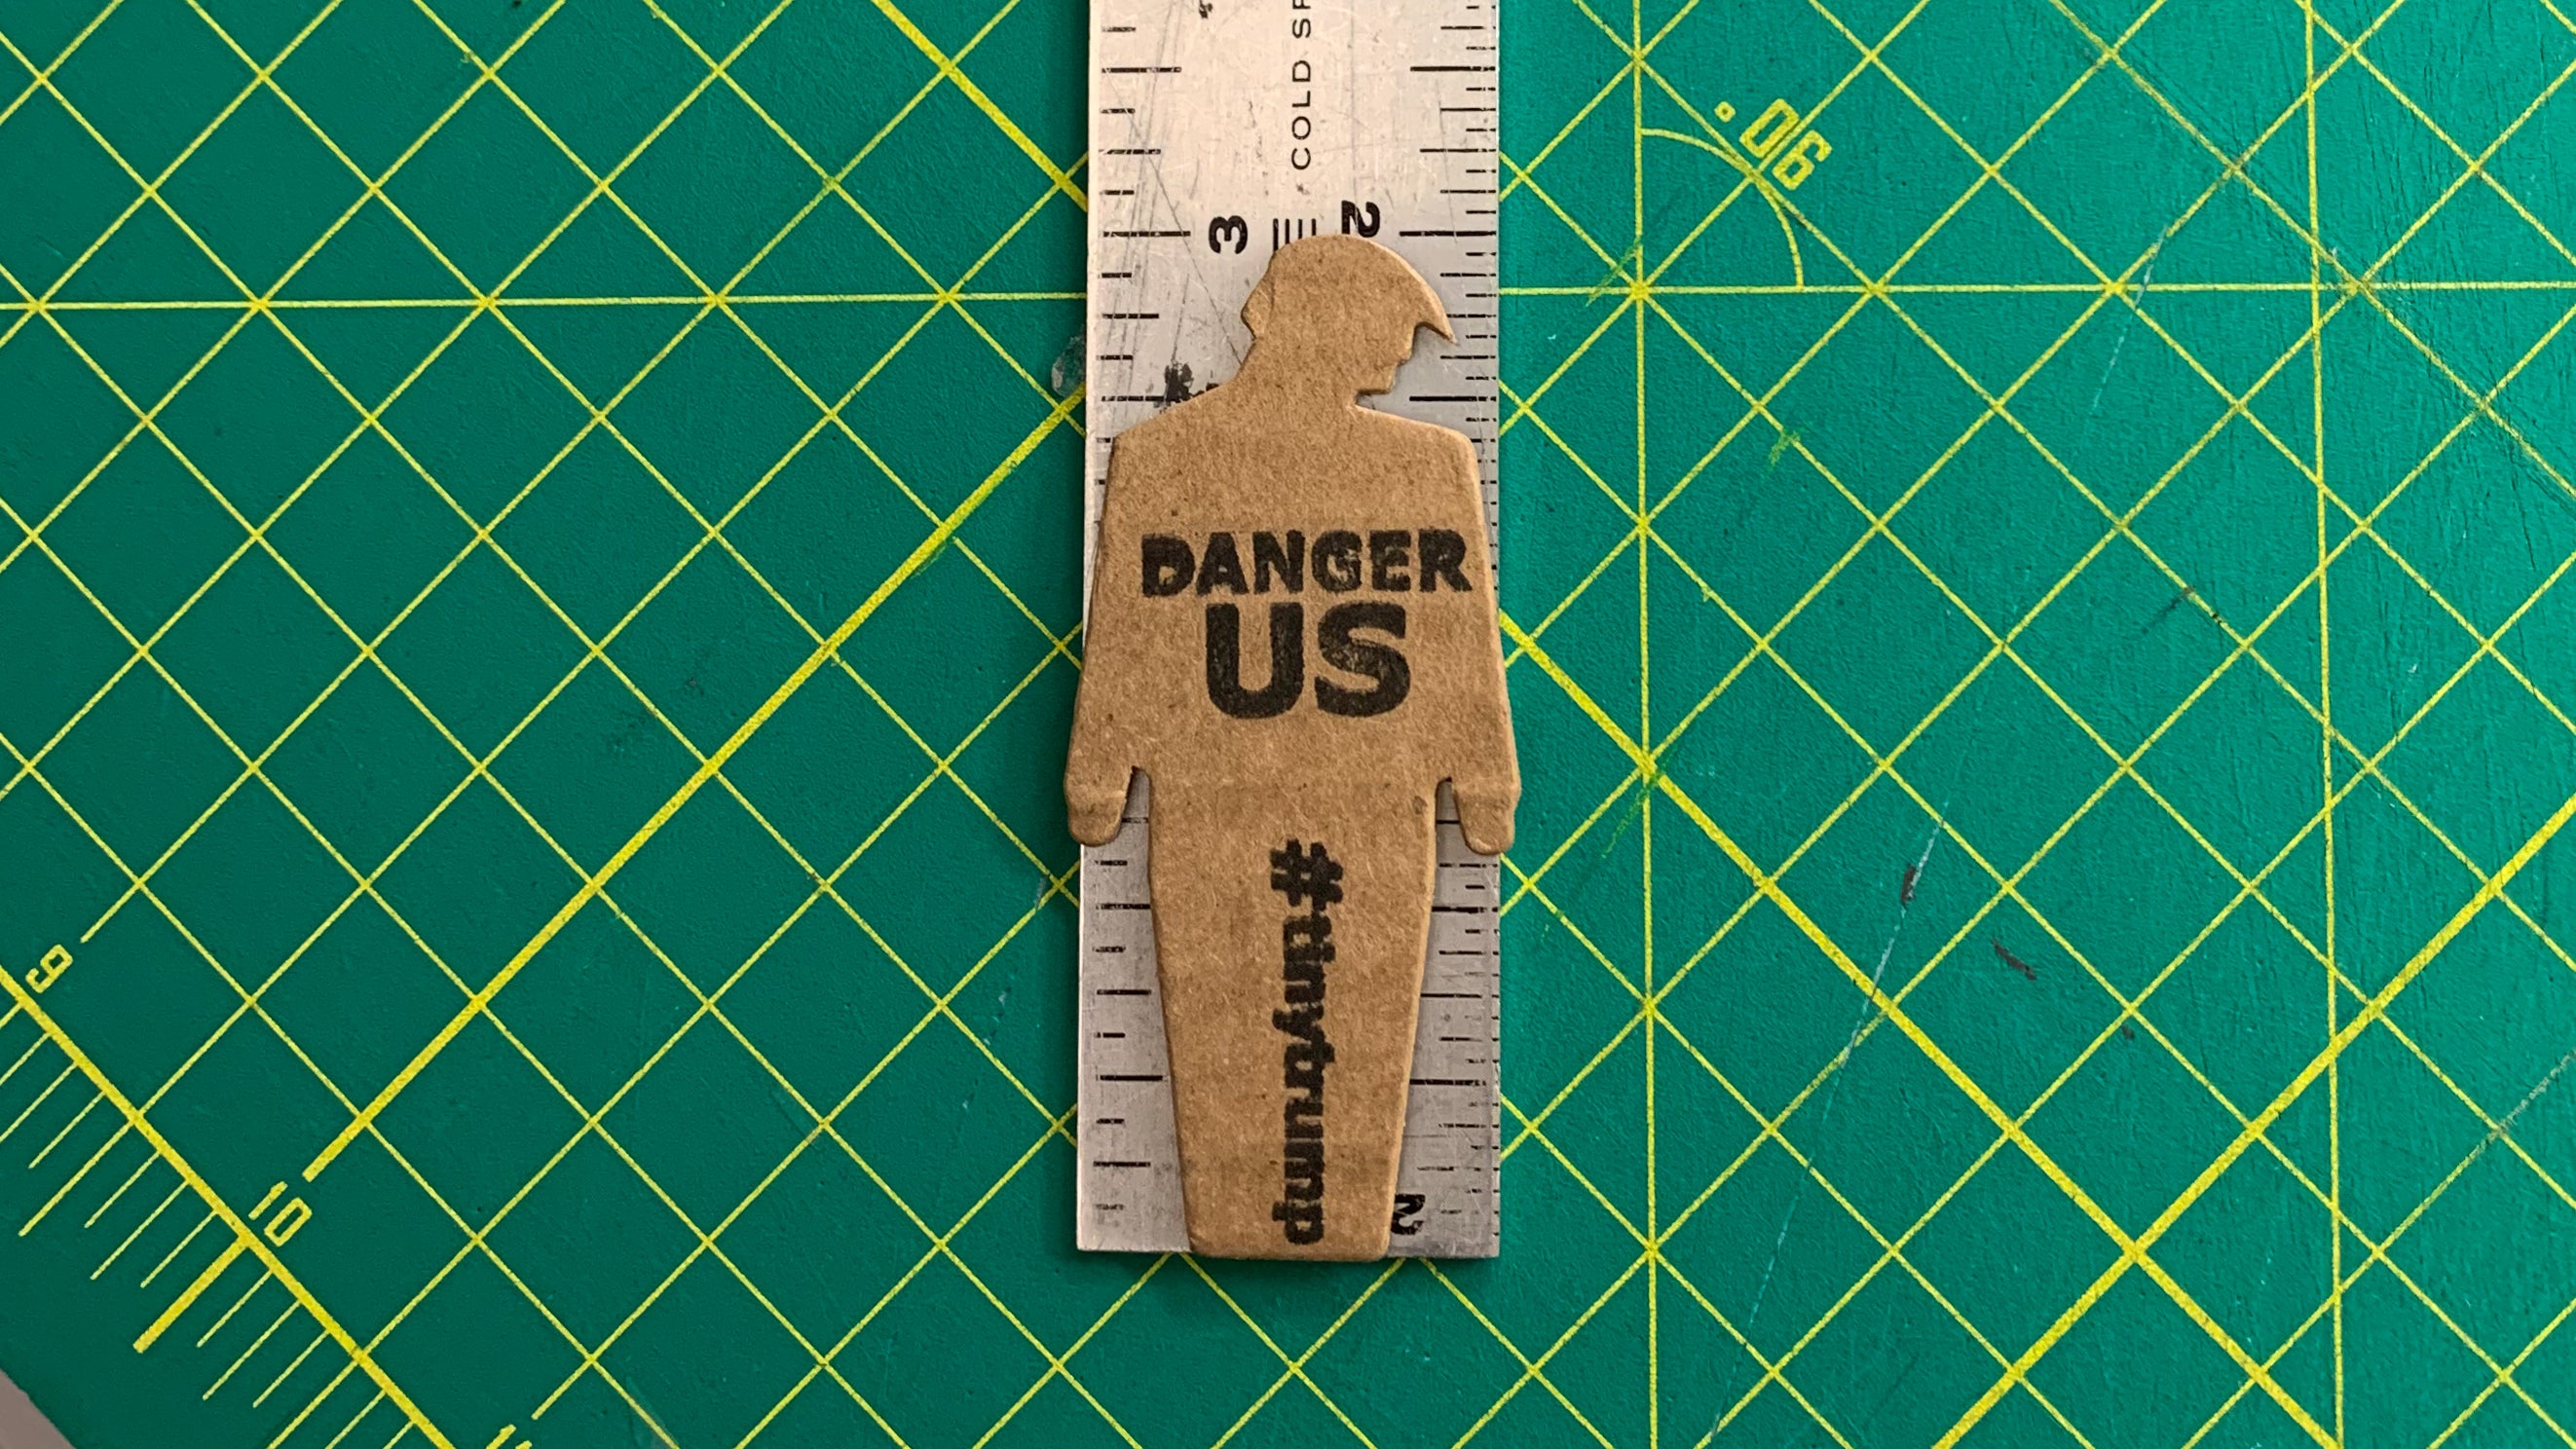 tiny trump with the slogan "Danger US" stuck to a ruler, indicating it is 3 inches tall